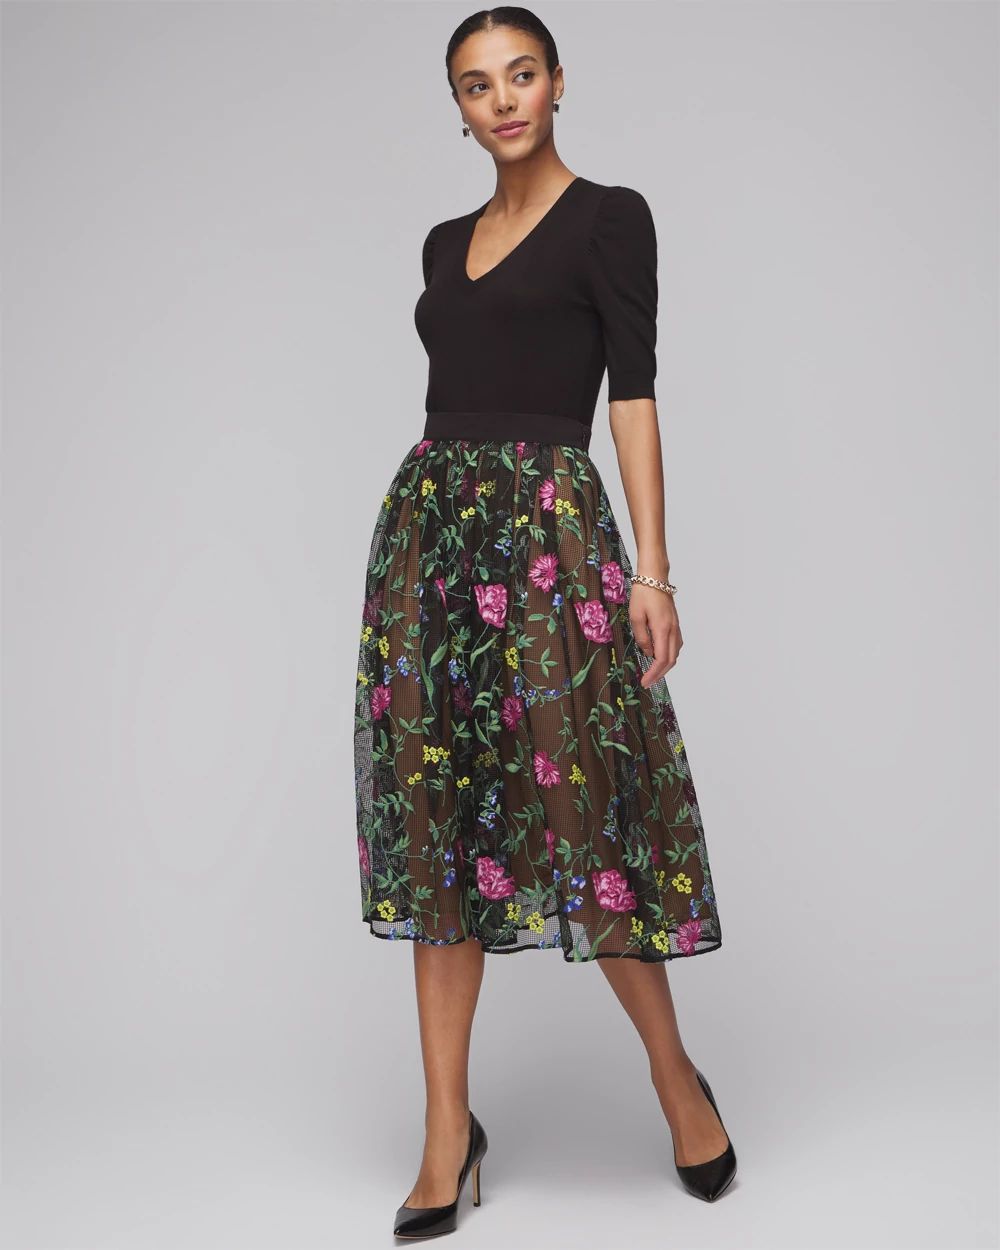 Embroidered Fit & Flare Skirt